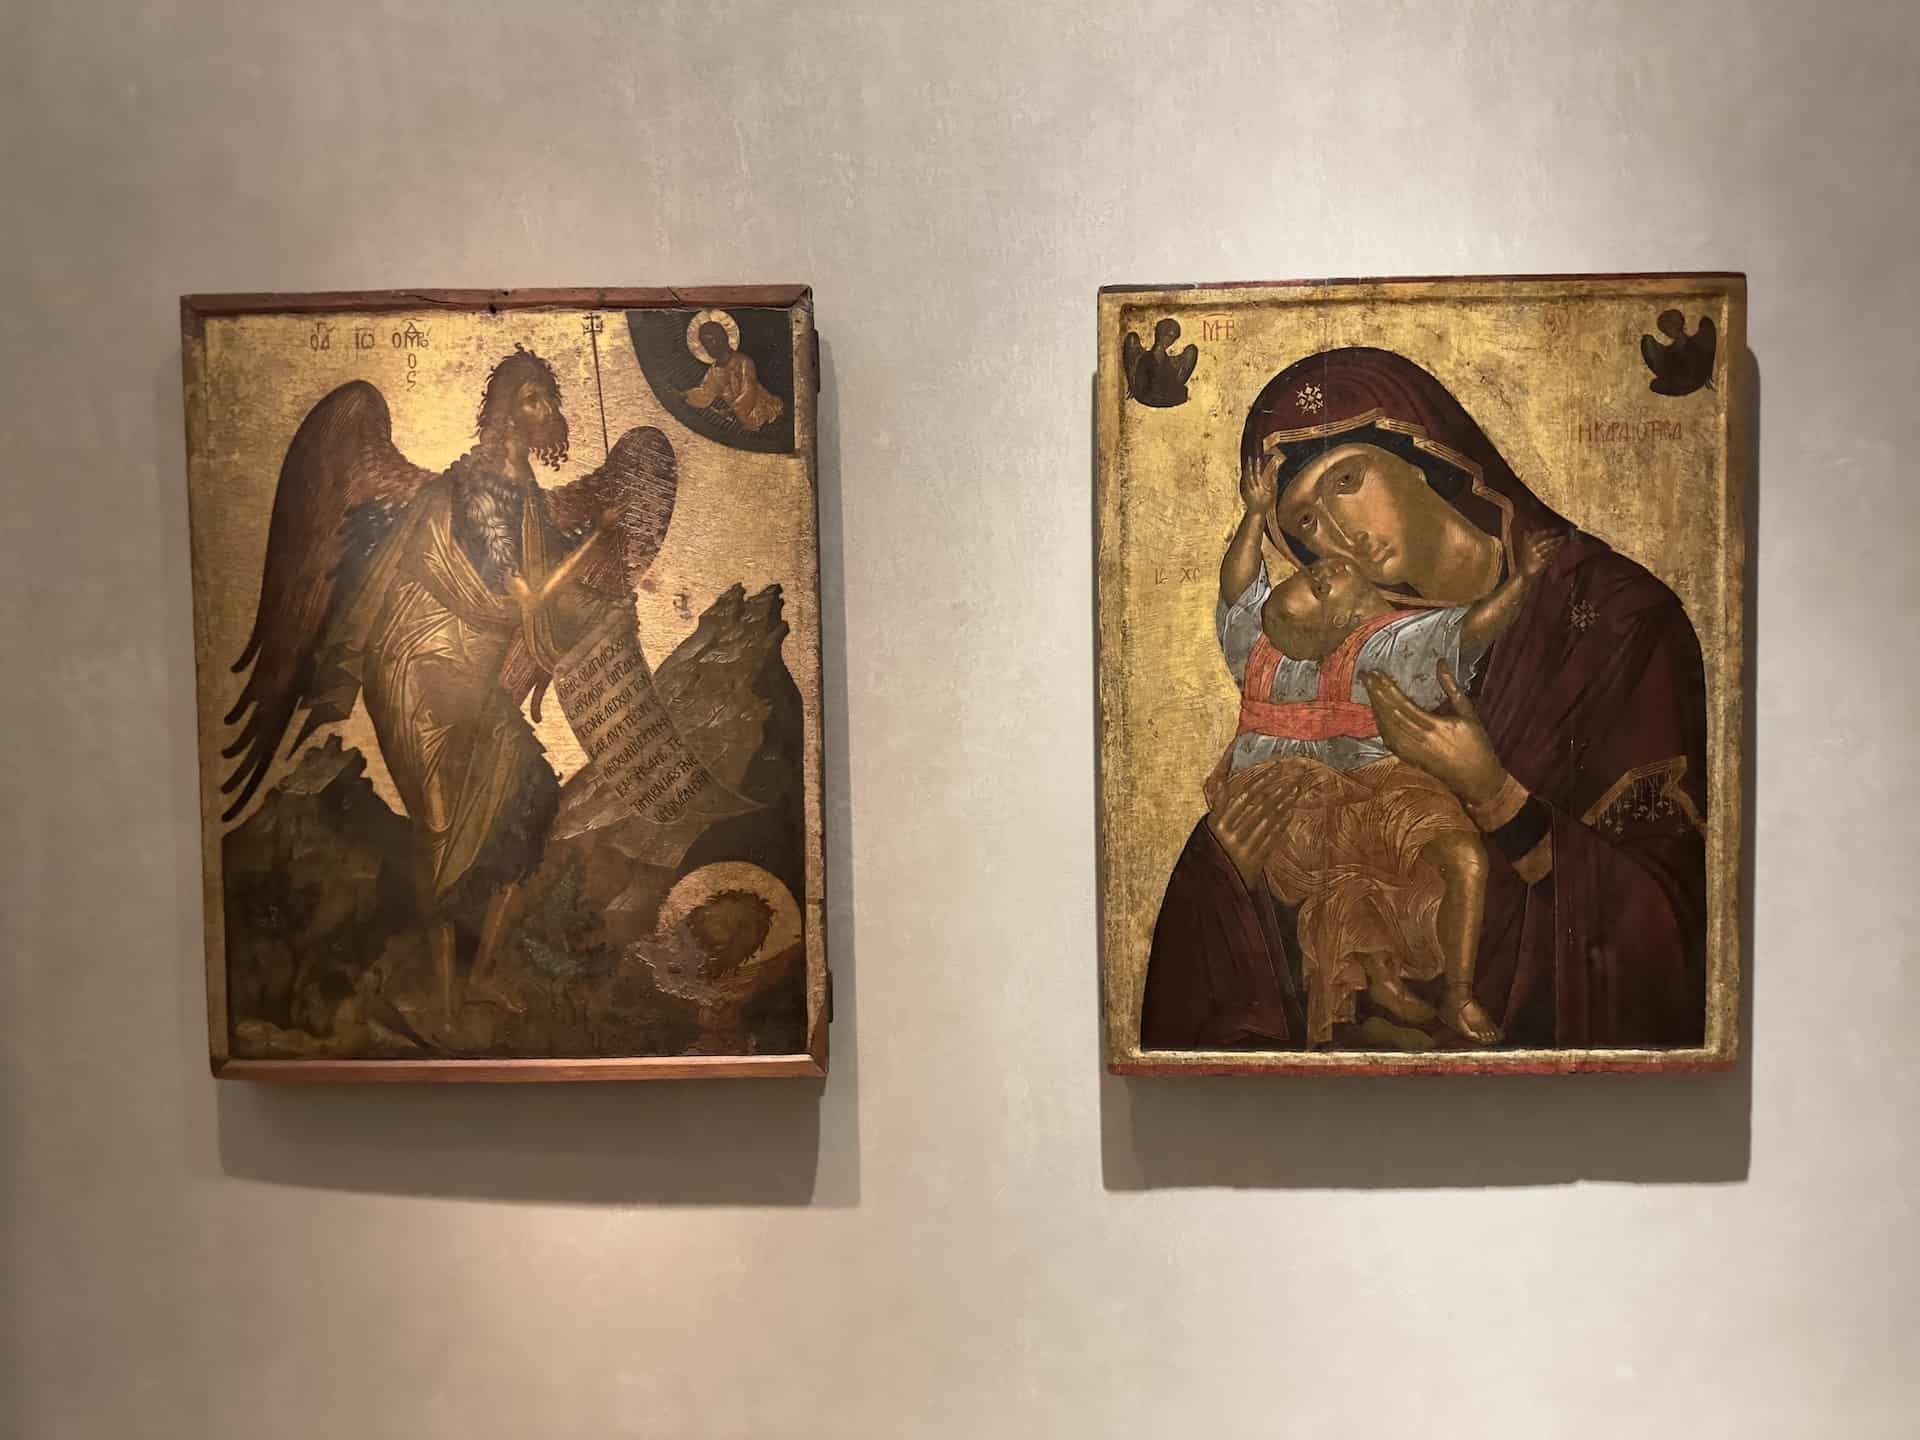 Icon with Saint John the Baptist (left) and Icon with the Virgin of Tenderness (Glykophilousa/Kardiotissa) (right), both painted by Angelos Akotantos, first half of the 15th century at the Byzantine Museum in Athens, Greece